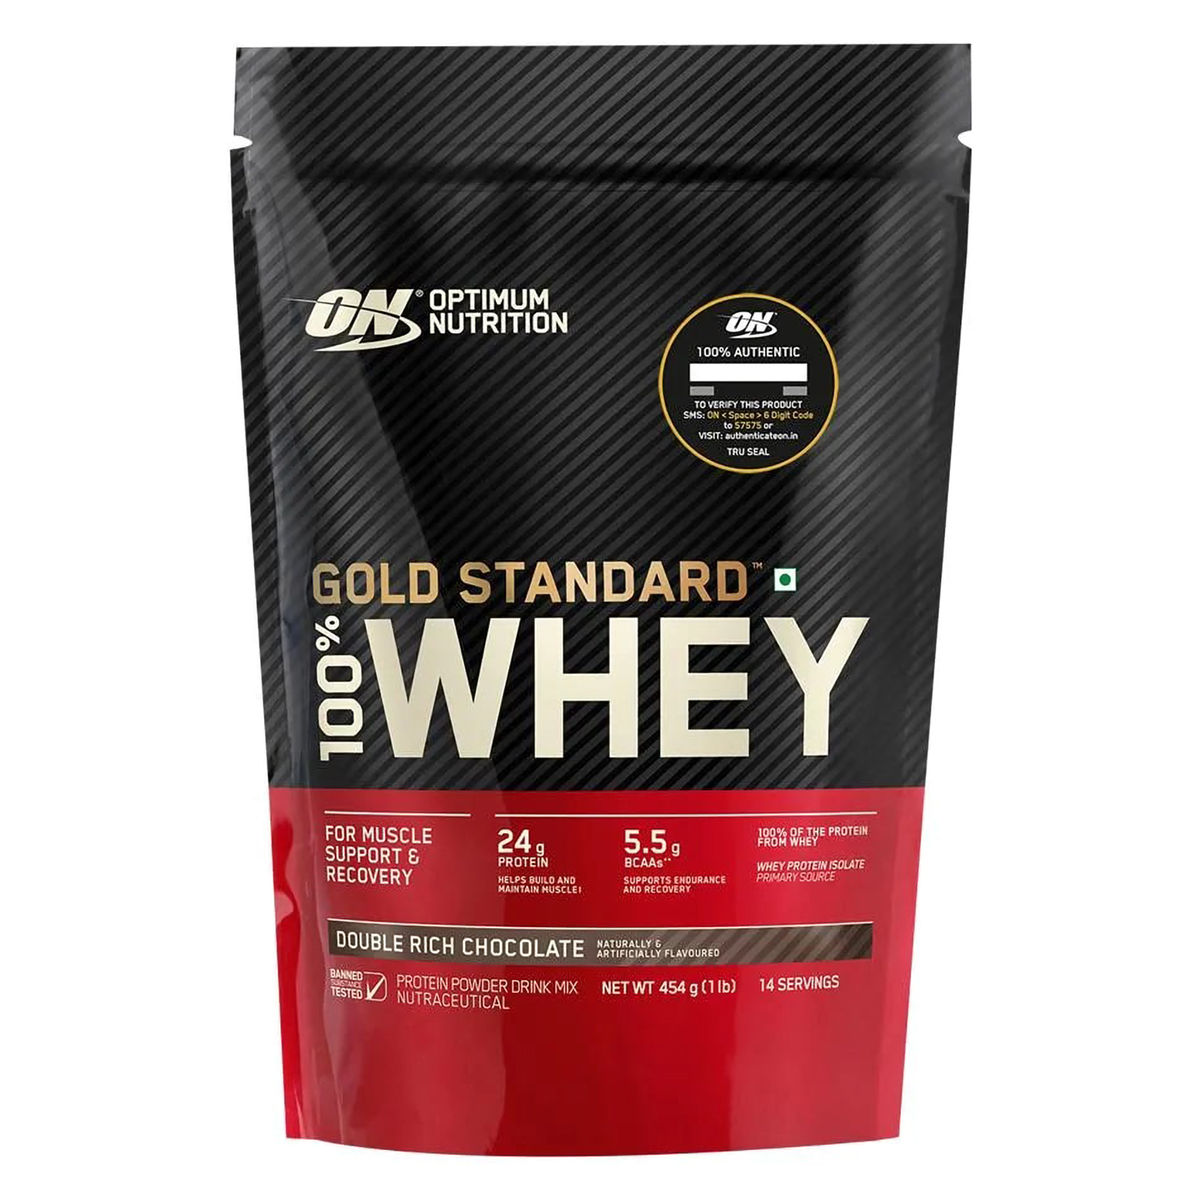 Buy Optimum Nutrition (ON) Gold Standard 100% Whey Protein Double Rich Chocolate Flavour Powder, 1 lb Online